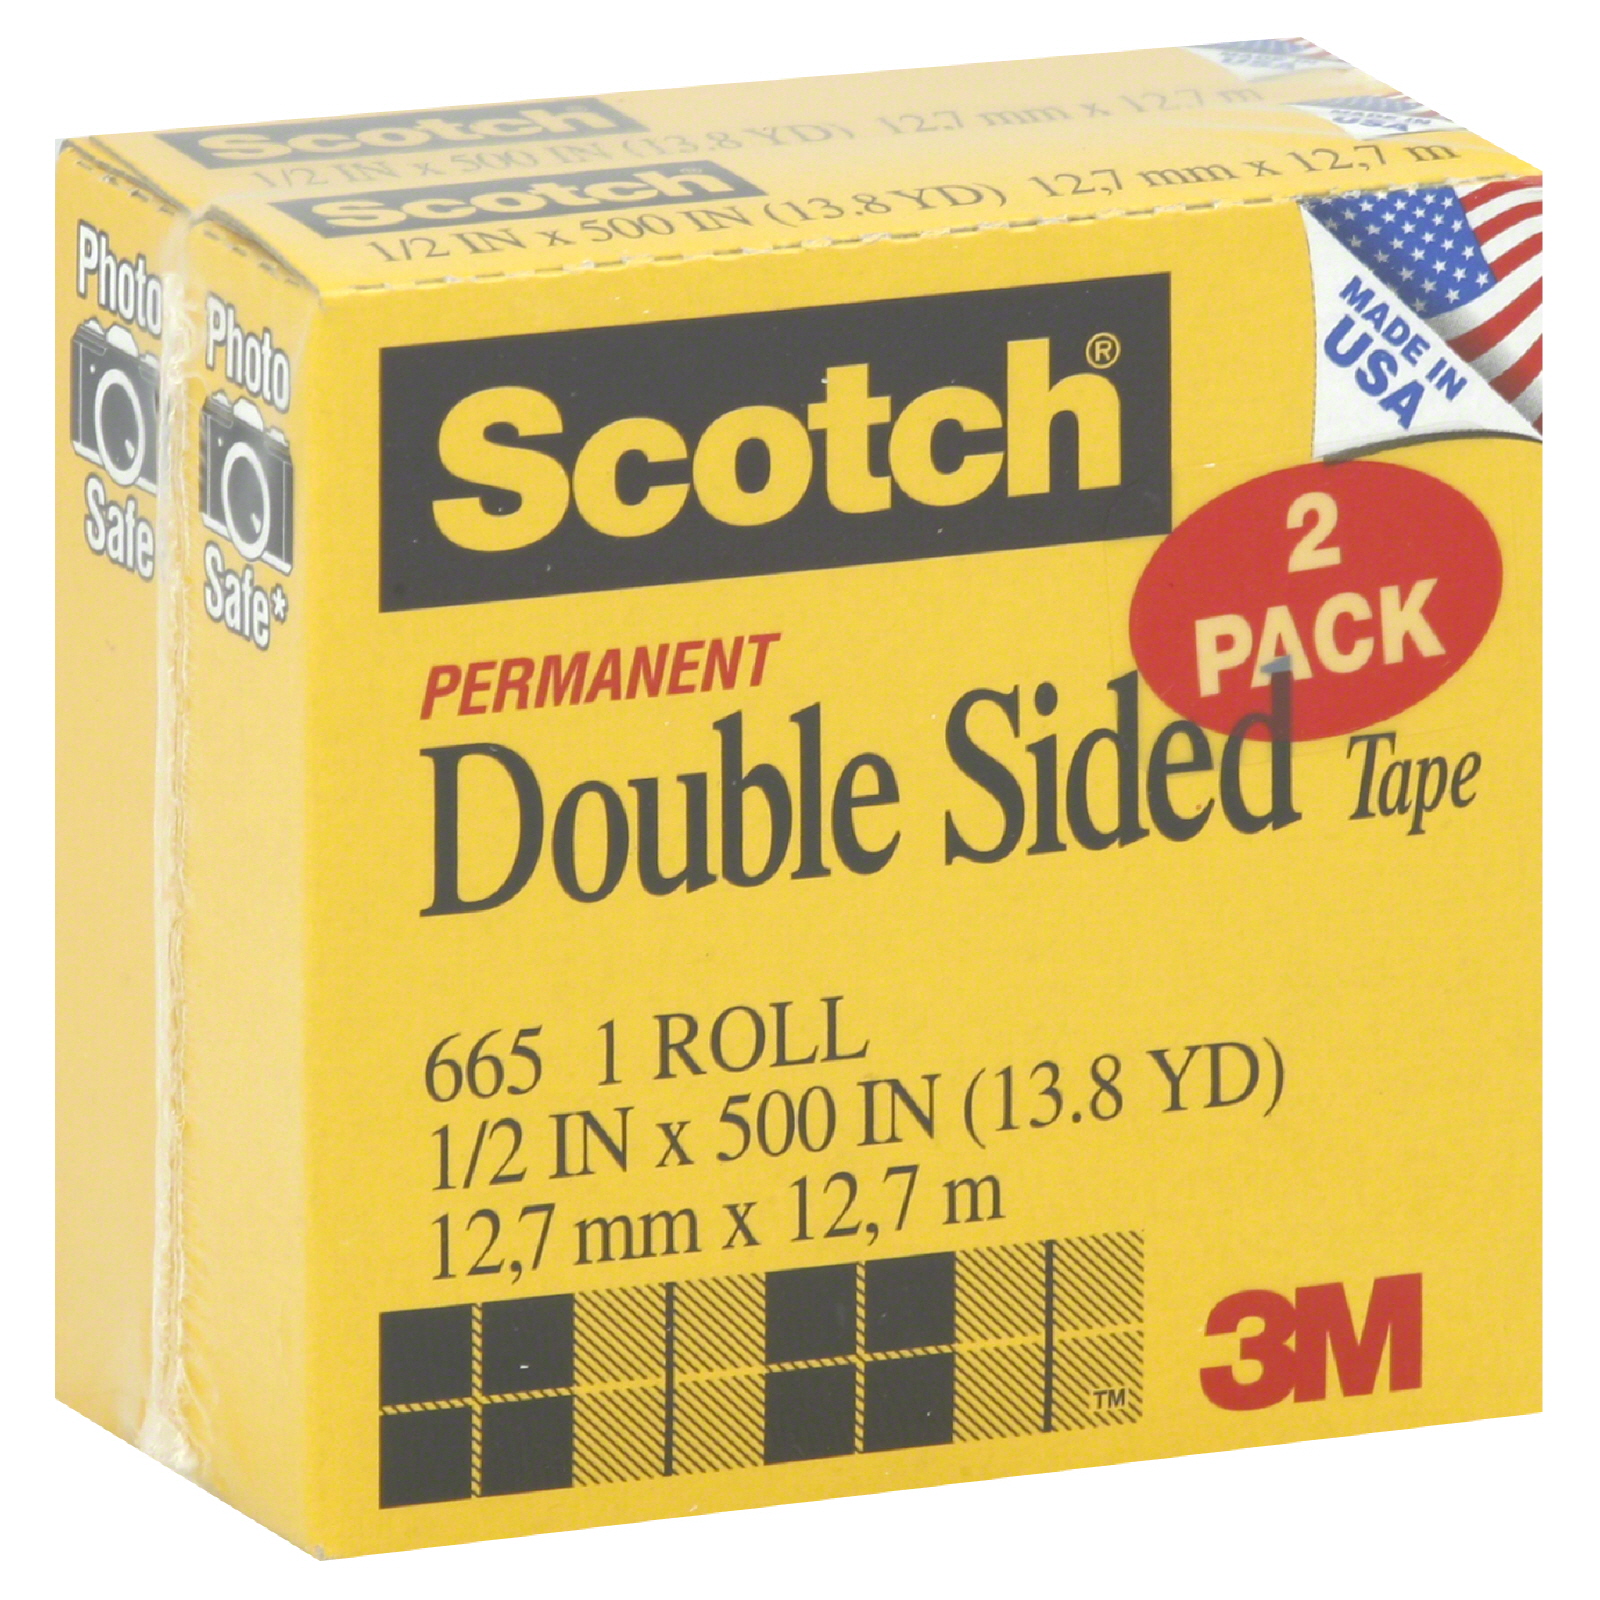 Scotch 665-2 Double Sided Tape, Permanent, 2 rolls